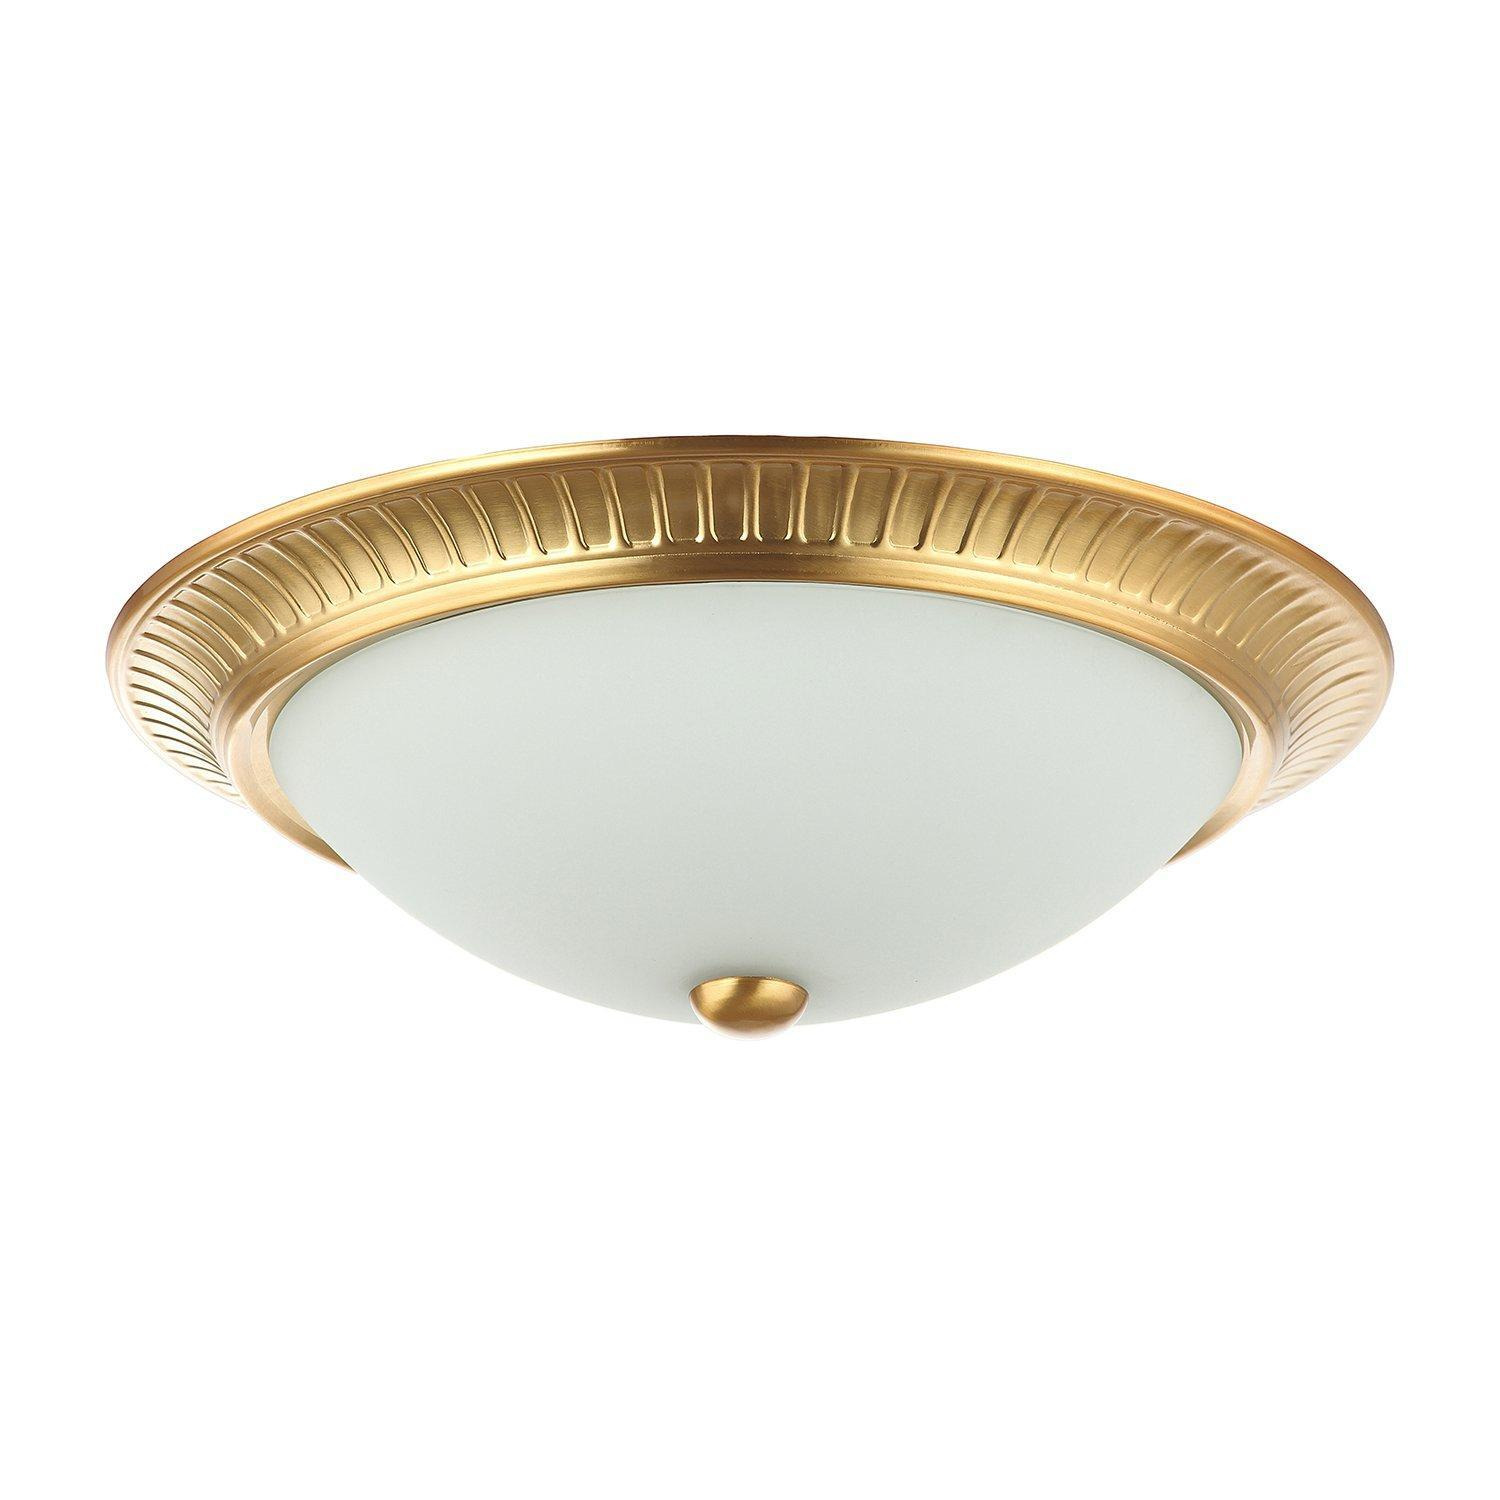 Traditional Metal Flush Ceiling Light Fitting with Opal Glass Diffuser - image 1